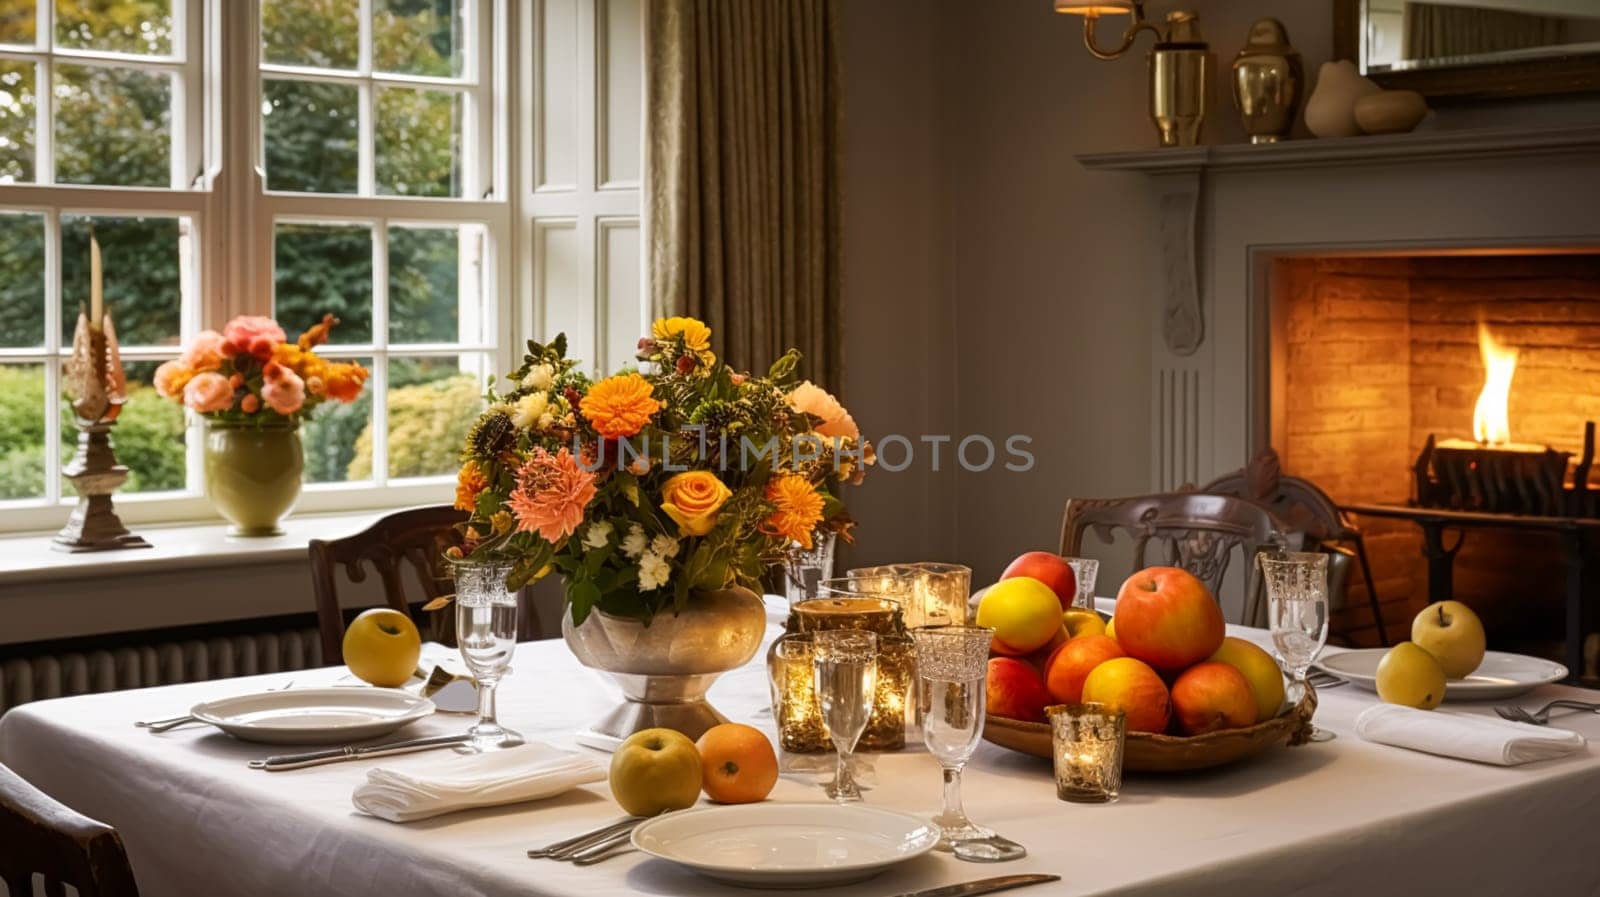 Dining room decor, interior design and autumn holiday celebration, elegant autumnal table decoration with candles and flowers, home decor and country cottage style by Anneleven